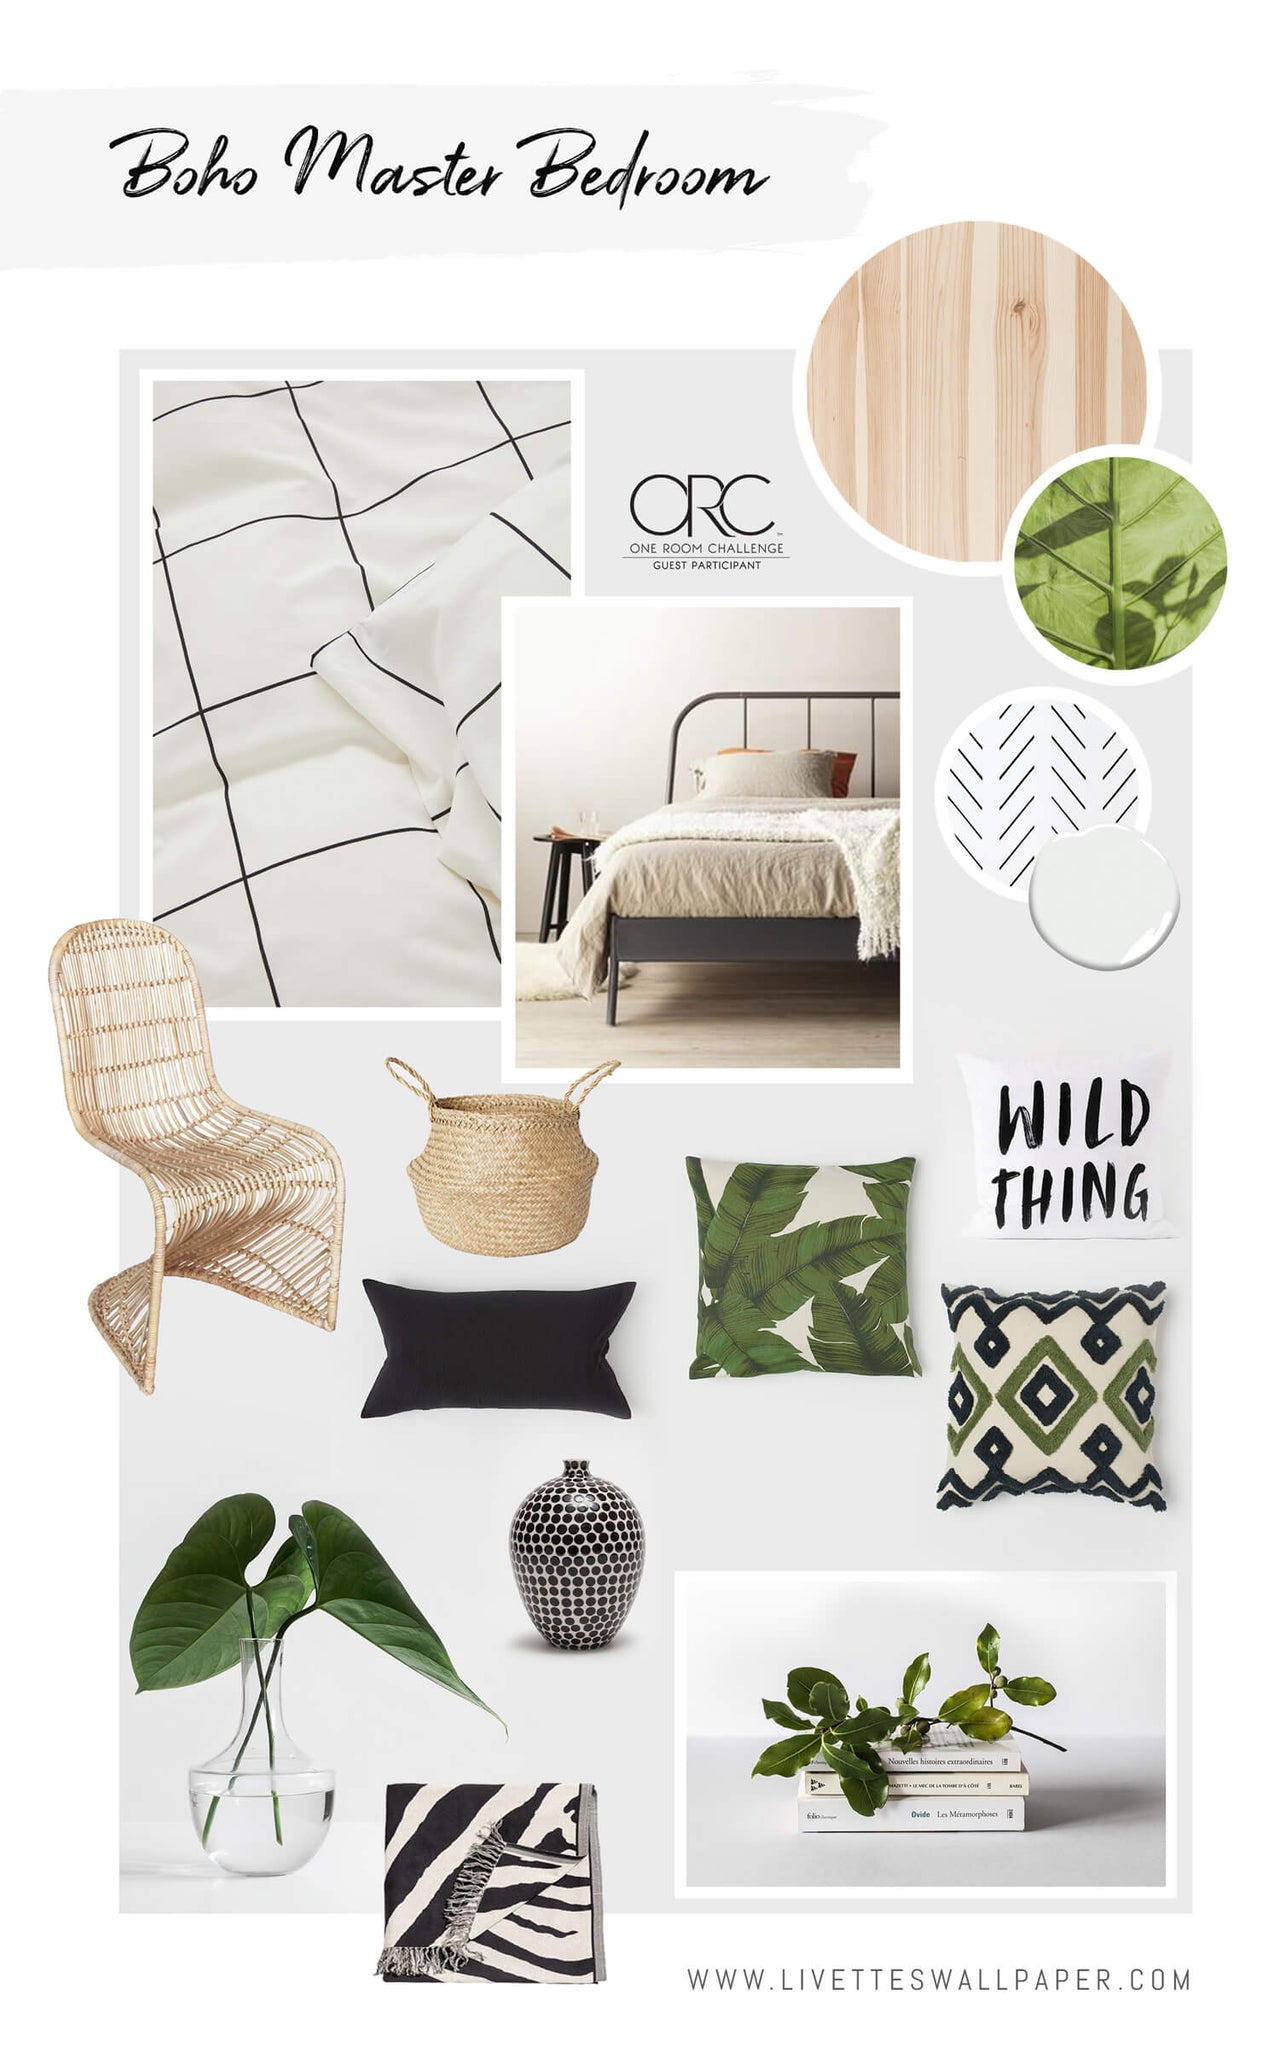 One room challenge 2019, spring series. Guest participant master bedroom remodel in modern bohemian interior style.